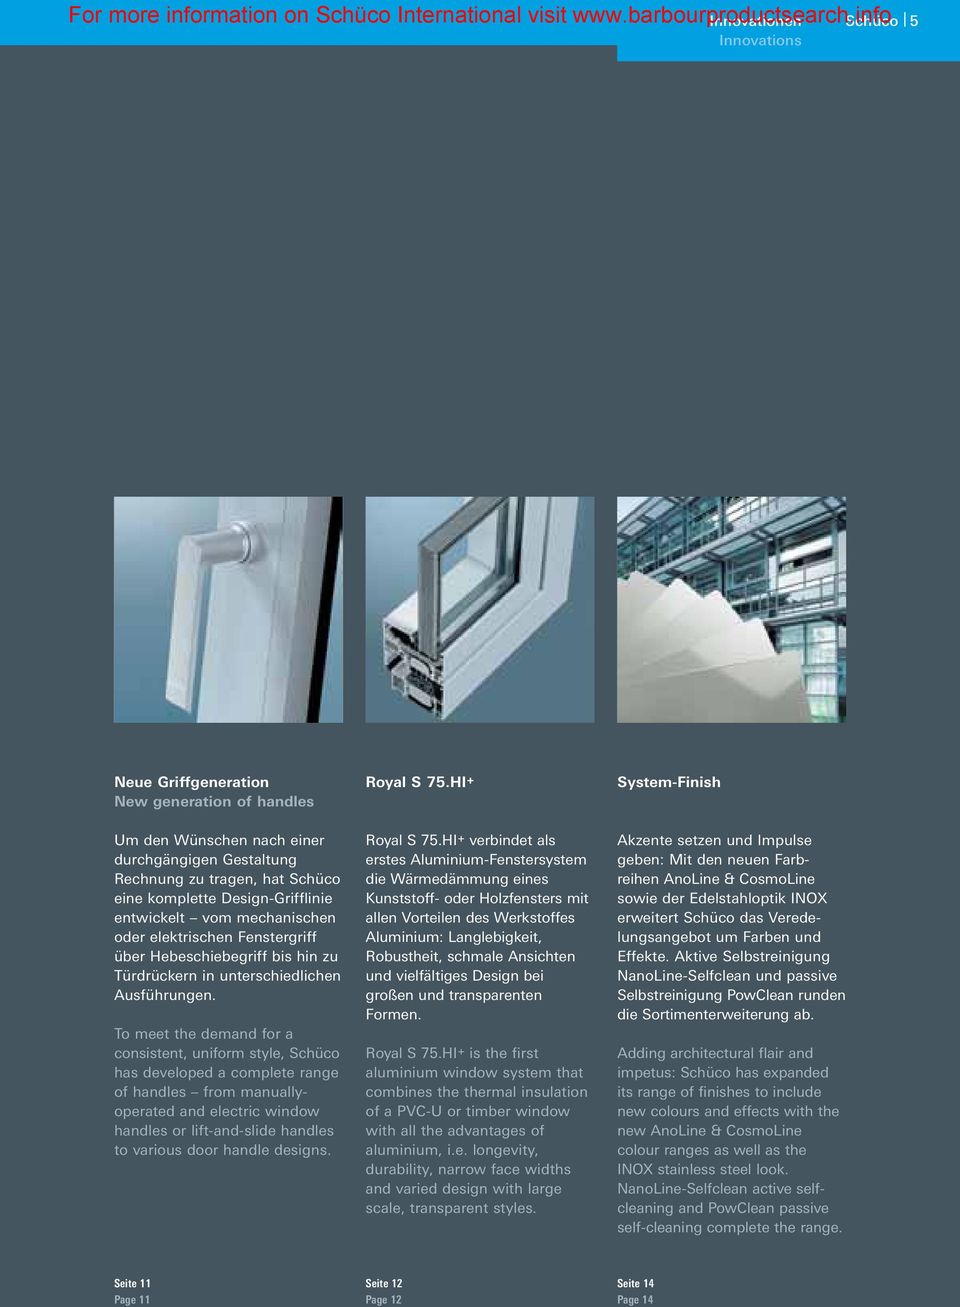 To meet the demand for a consistent, uniform style, Schüco has developed a complete range of handles from manuallyoperated and electric window handles or lift-and-slide handles to various door handle